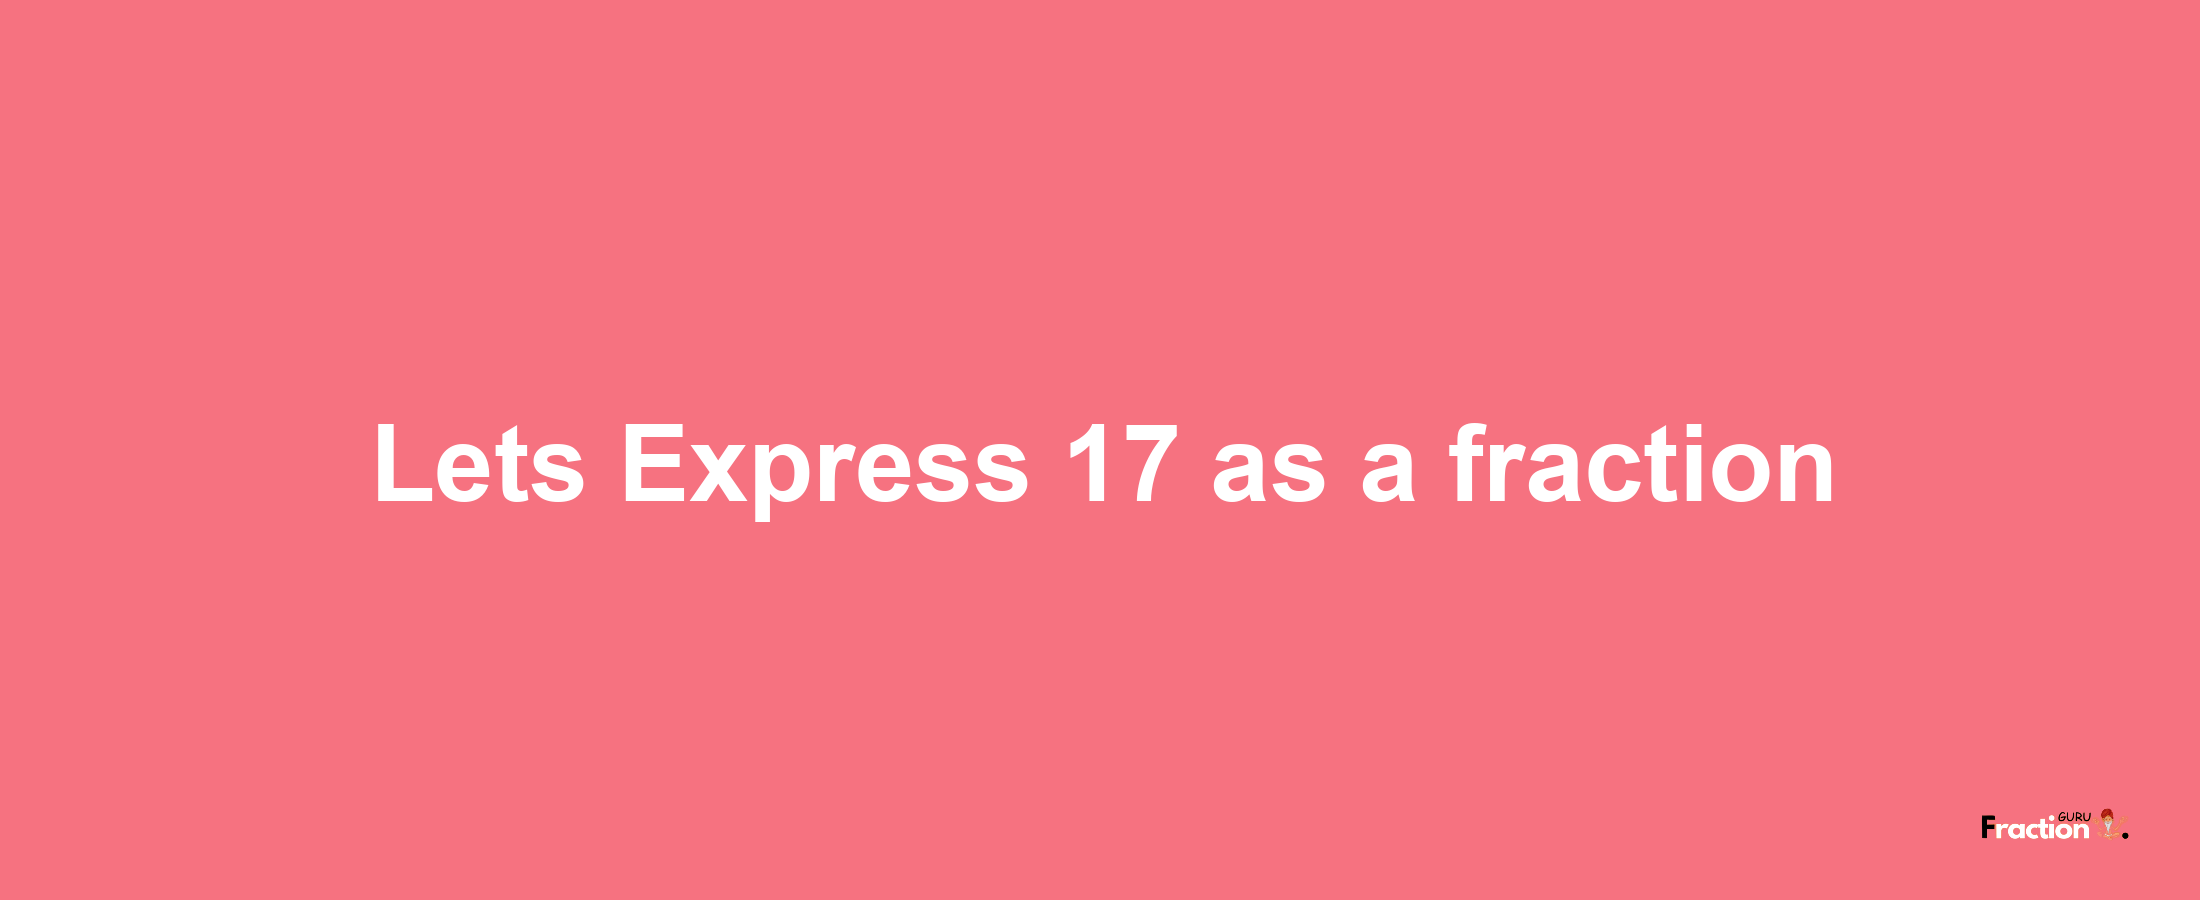 Lets Express 17 as afraction